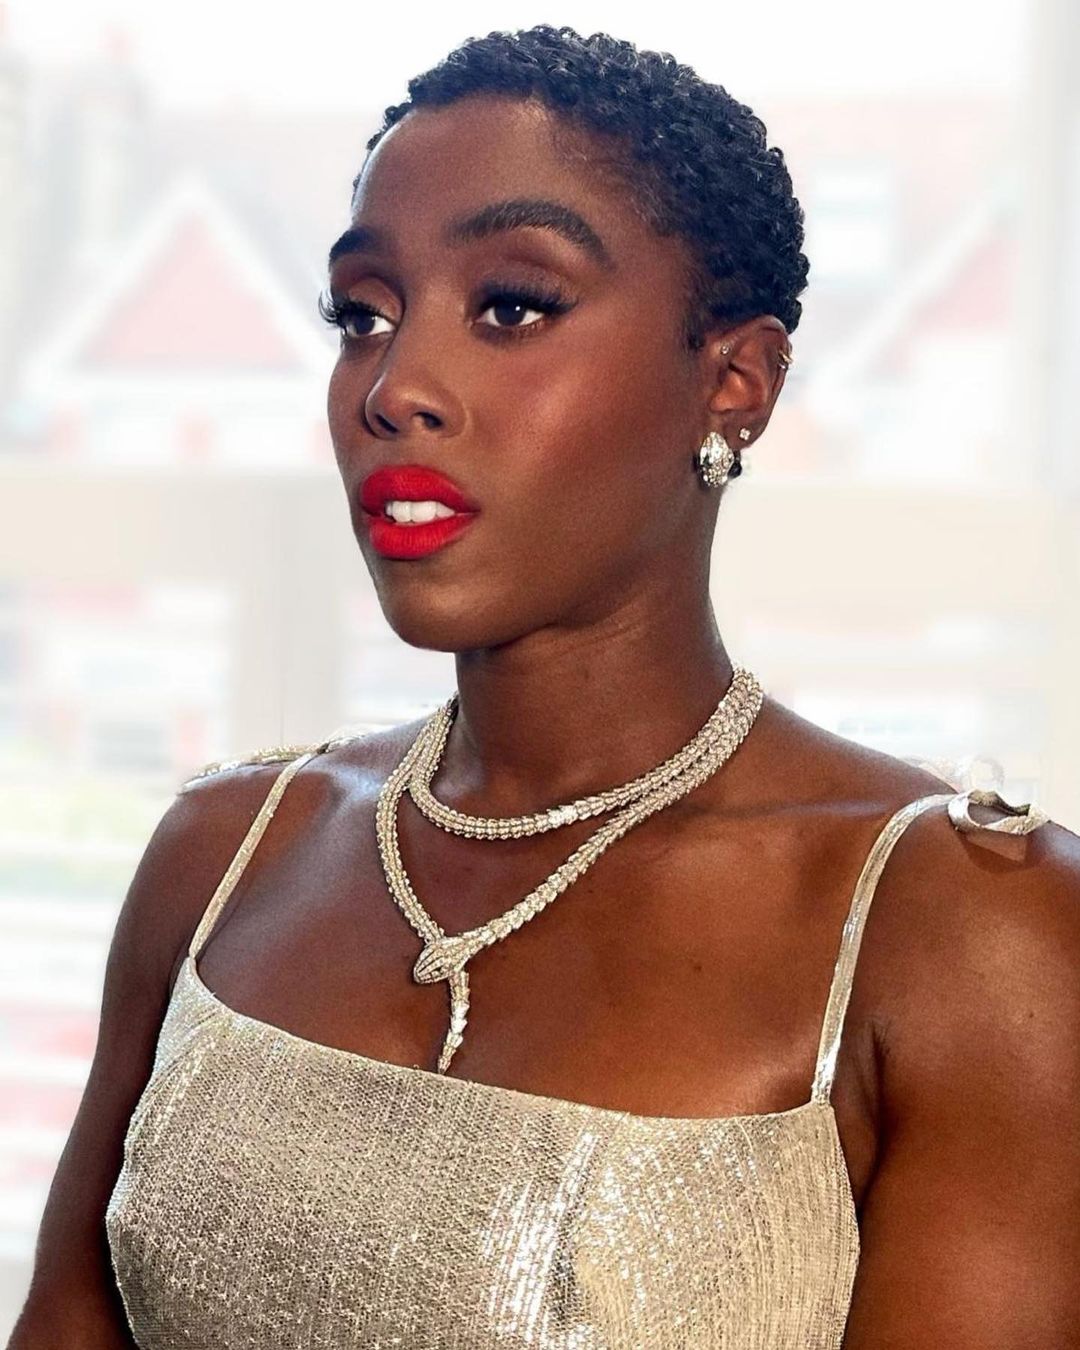 Lashana Lynch has revealed nothing about who she is dating, or if she has a boyfriend or husband.